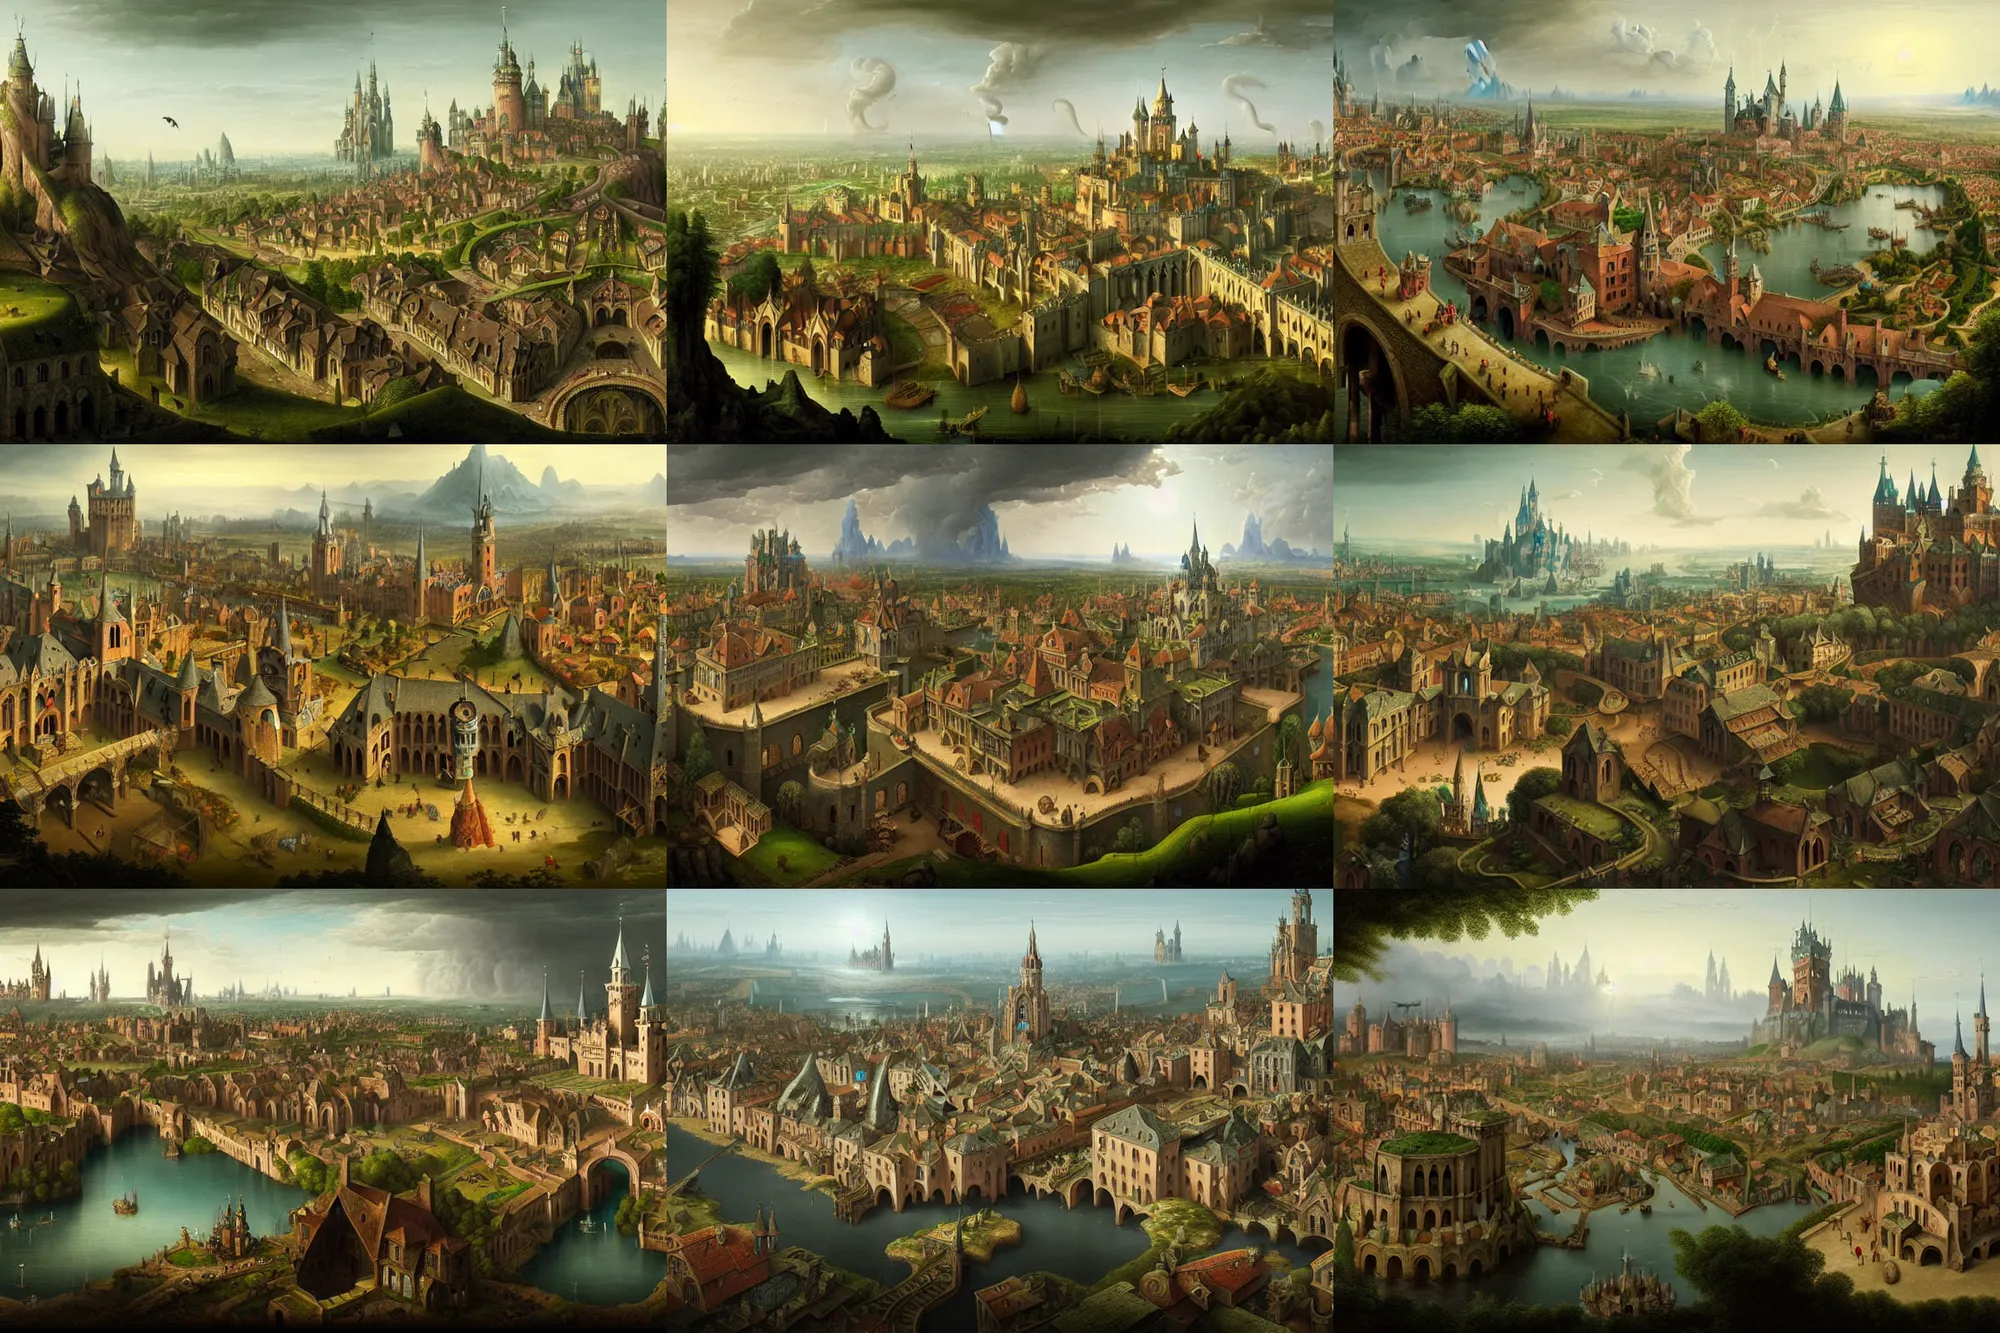 Prompt: a beautiful and insanely detailed matte painting of a magical mythical medieval city with architecture in the style of Heironymous Bosch by Bernardo Bellotto and Jim Burns